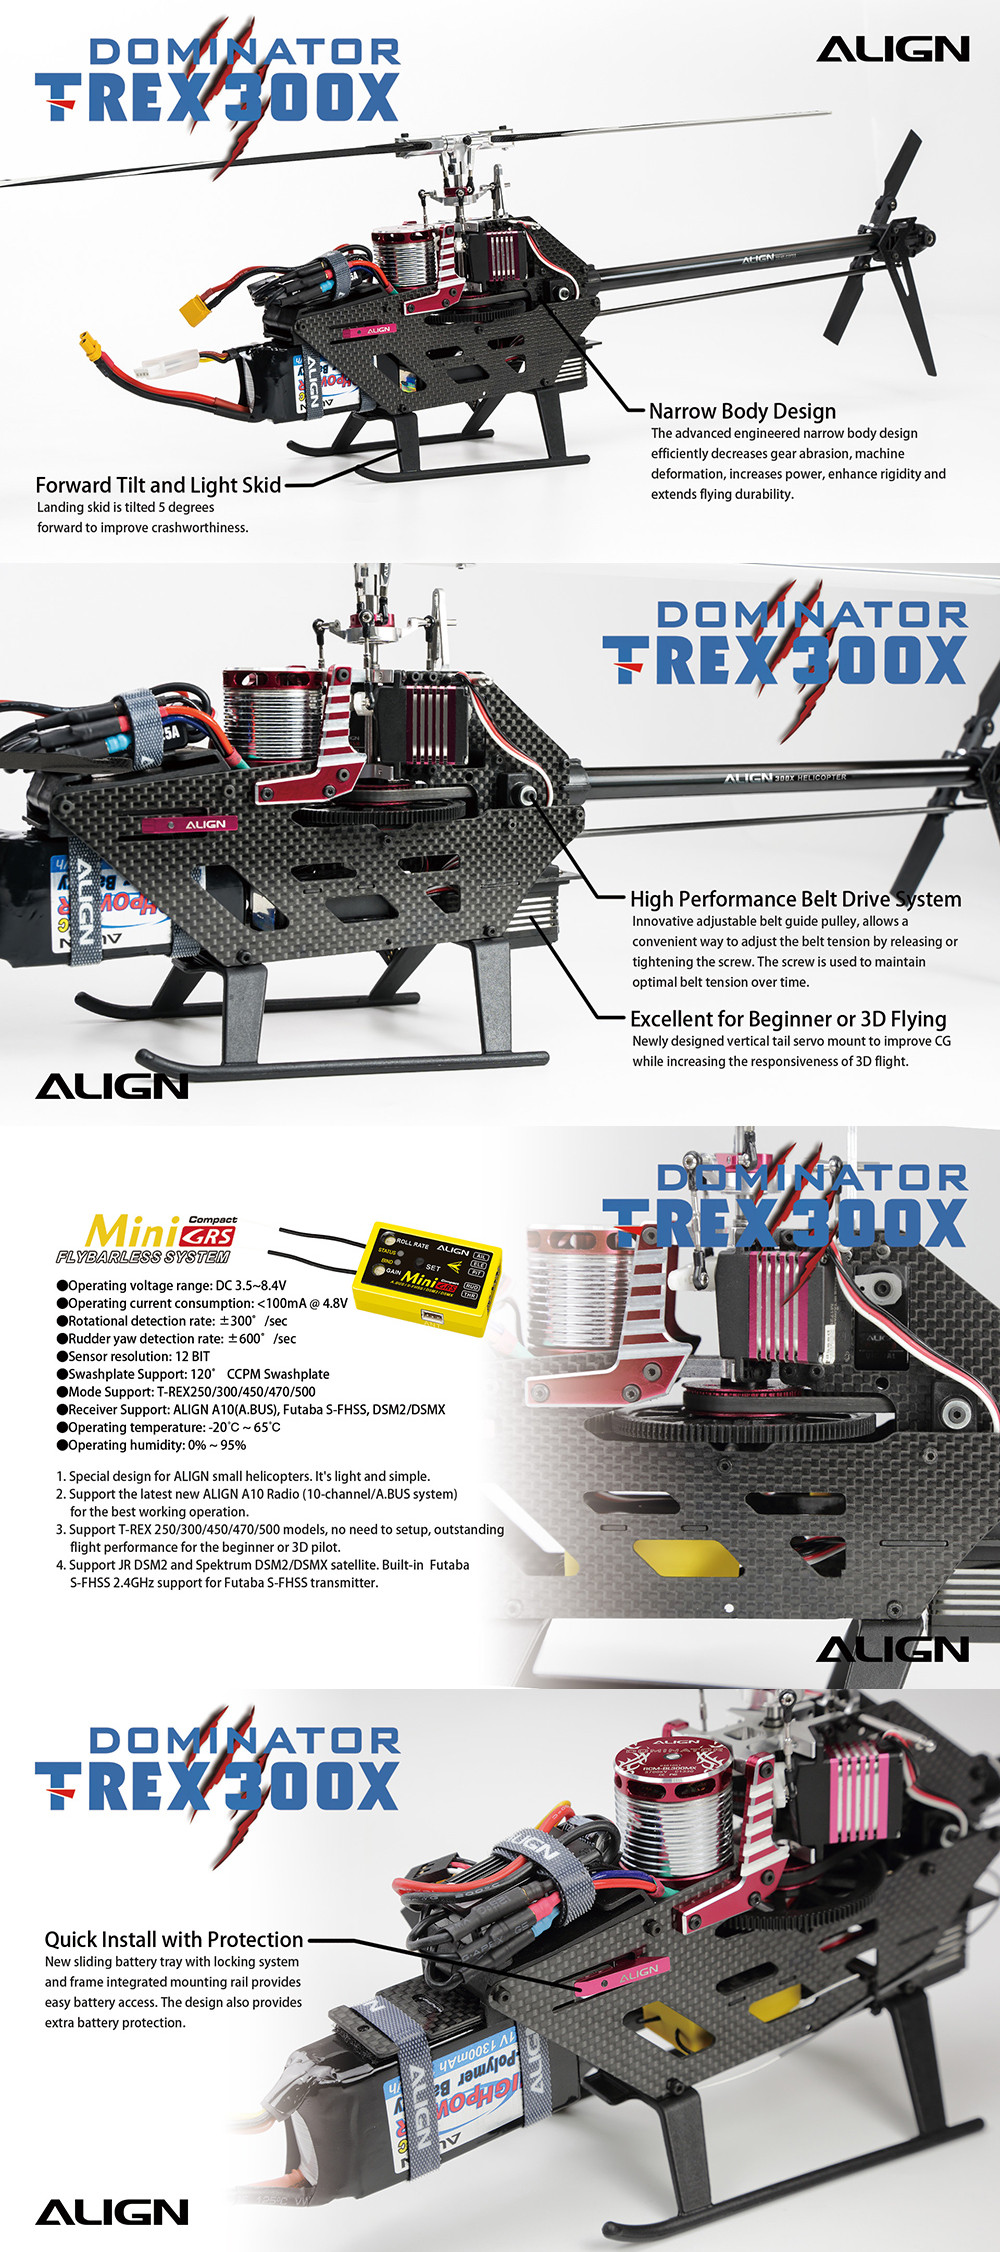 Align-T-Rex-300X-DOMINATOR-DFC-6CH-3D-Flying-RC-Helicopter-RTF-With-A10-Transmitter-1542056-2